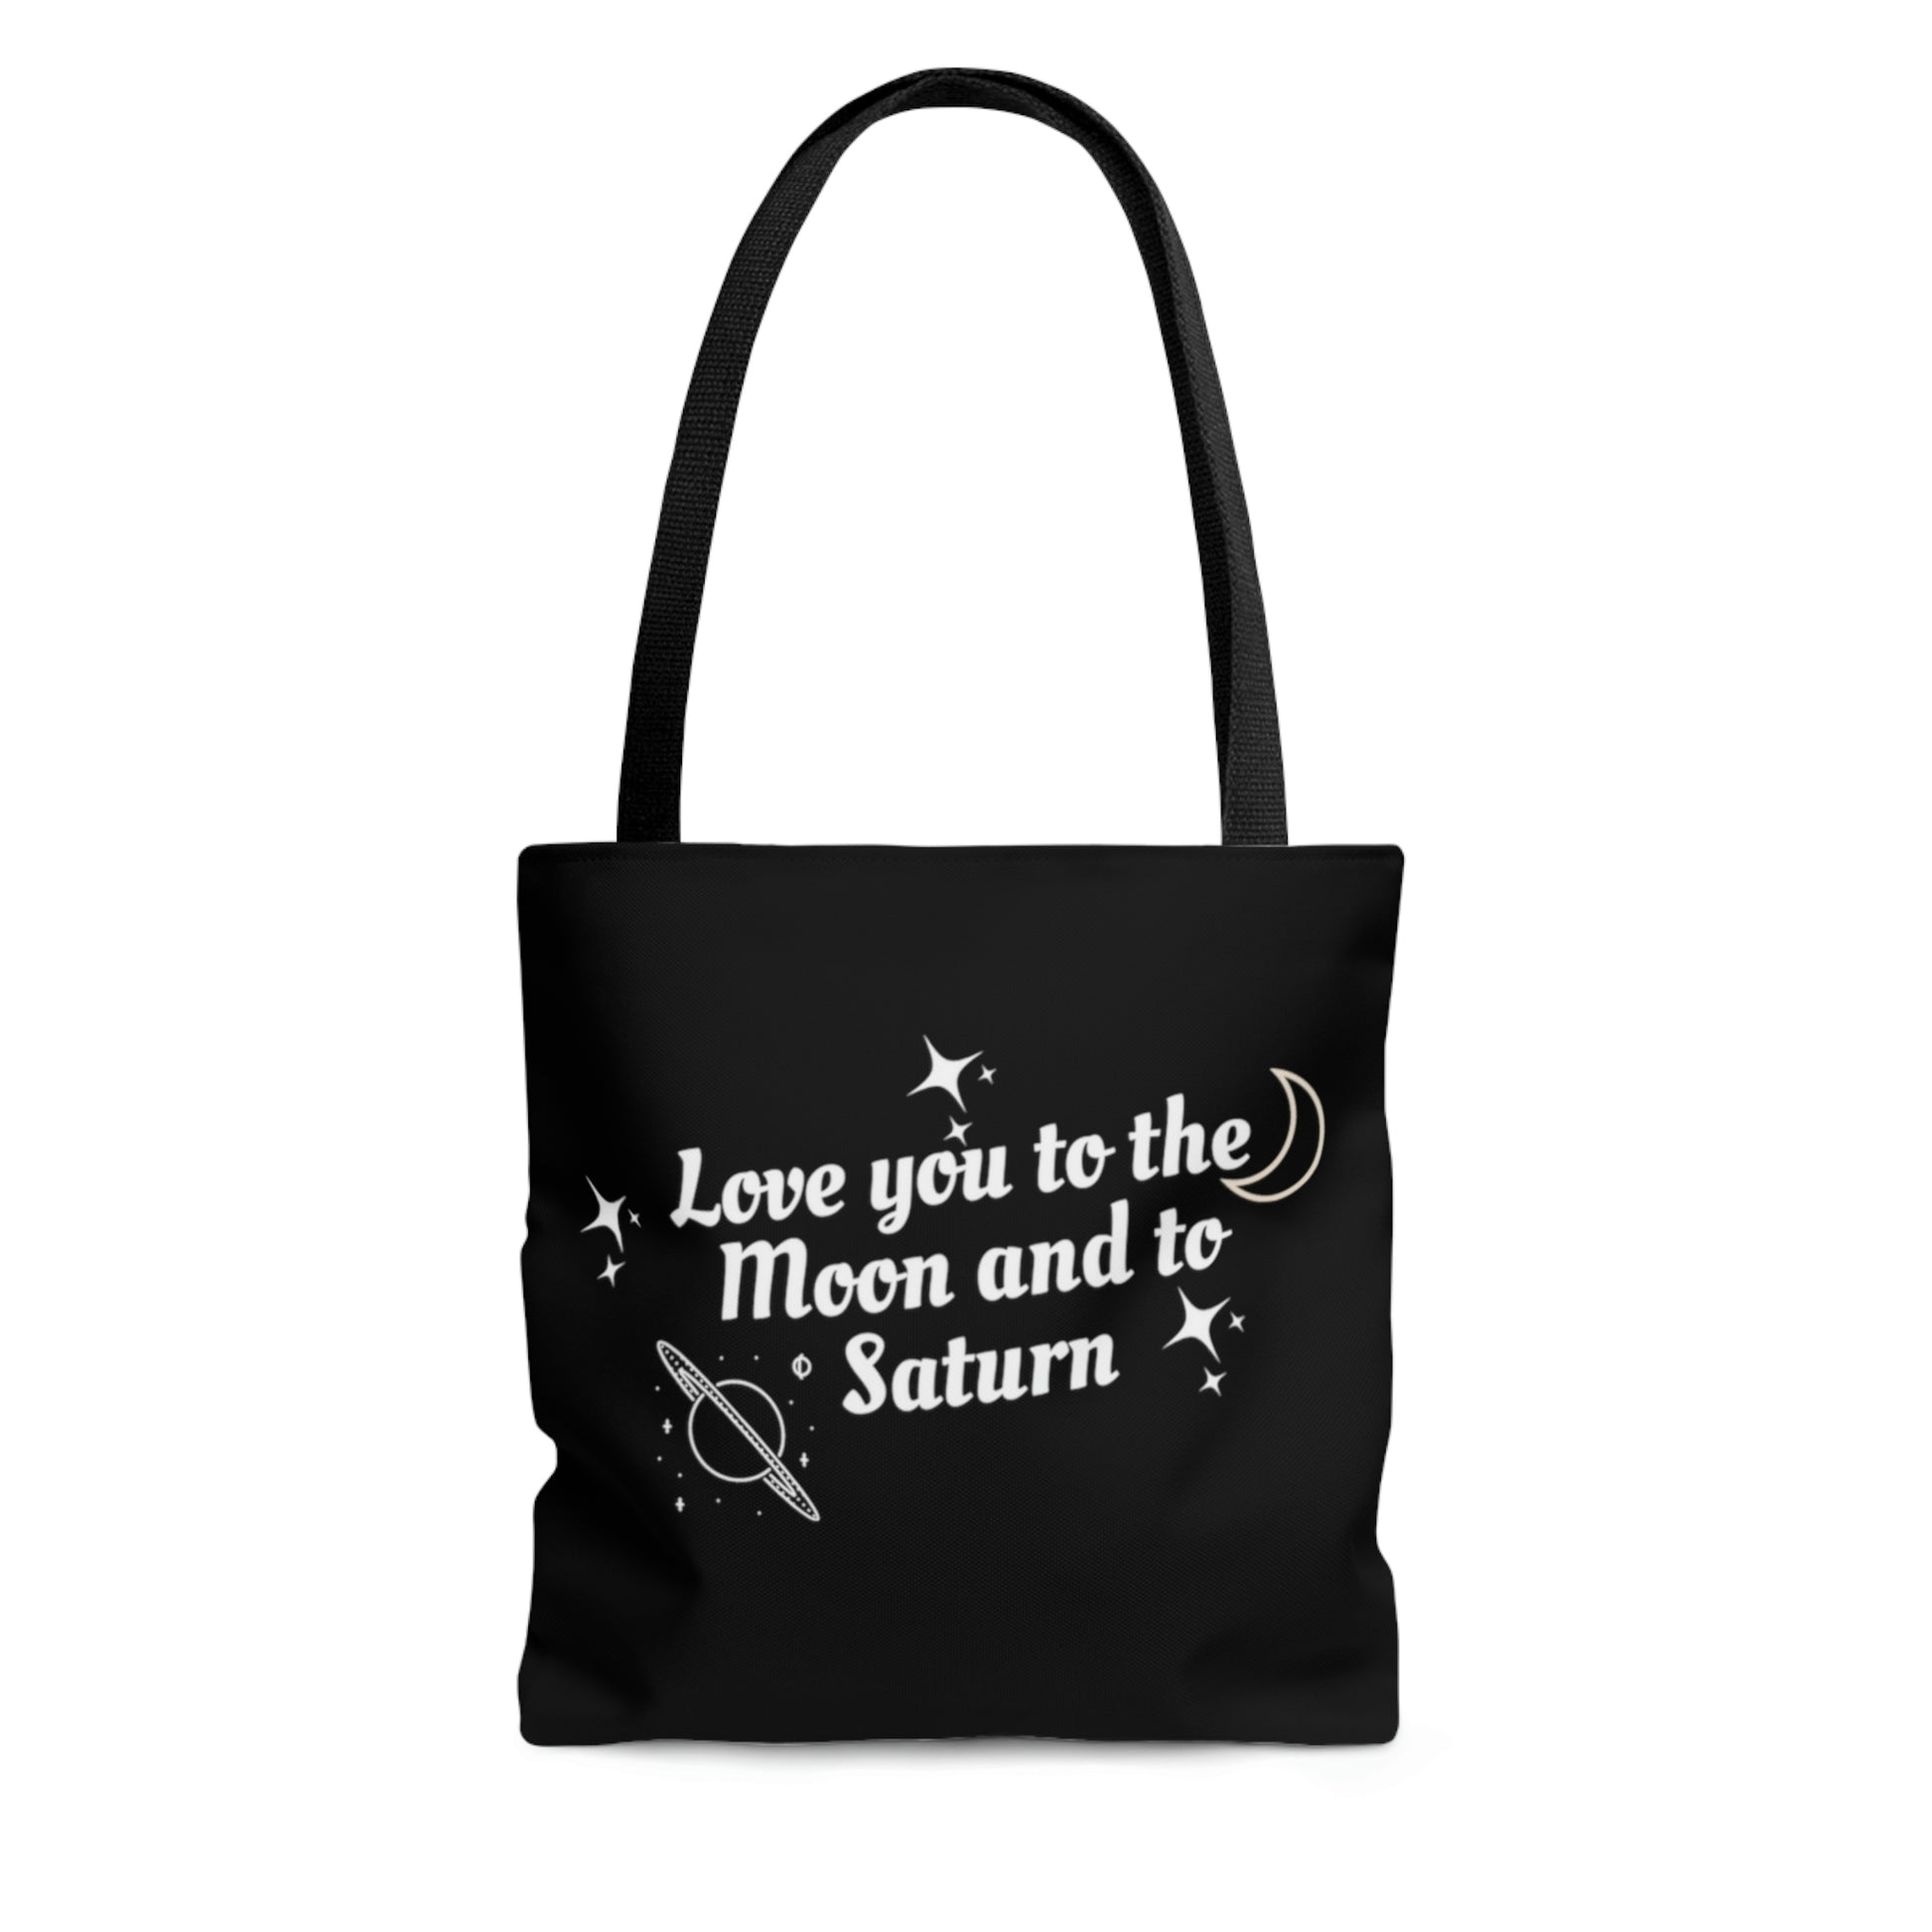 Love You to the Moon & Saturn, Fan Tote Bag